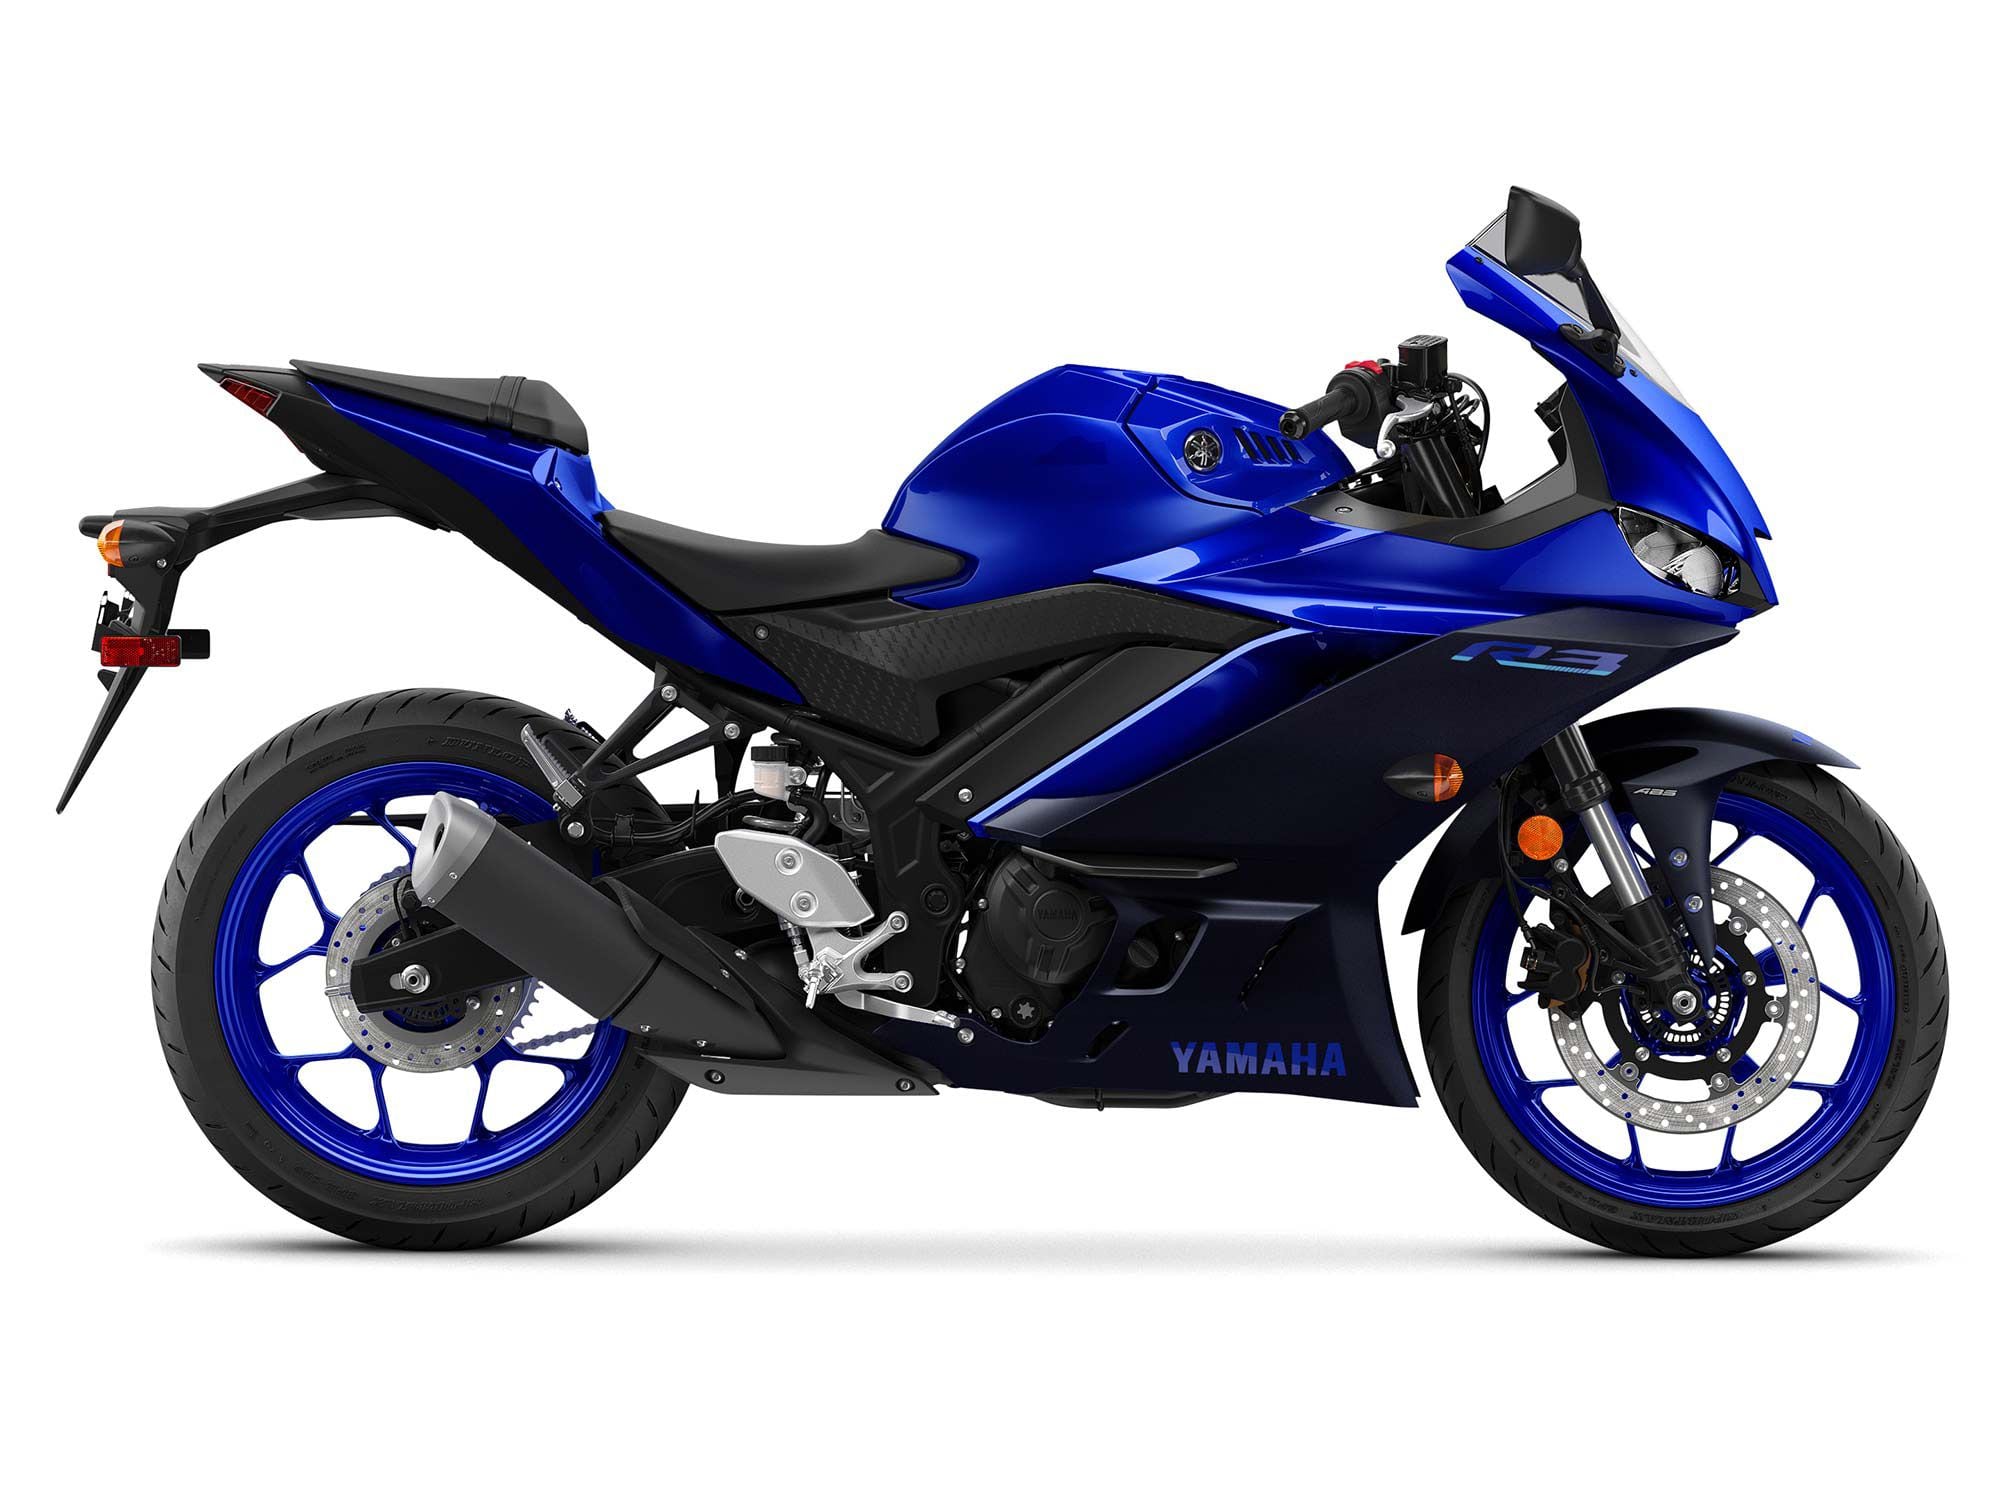 The YZF-R3 is Yamaha’s fully-faired entry-level sportbike and is inspired by its larger supersports.